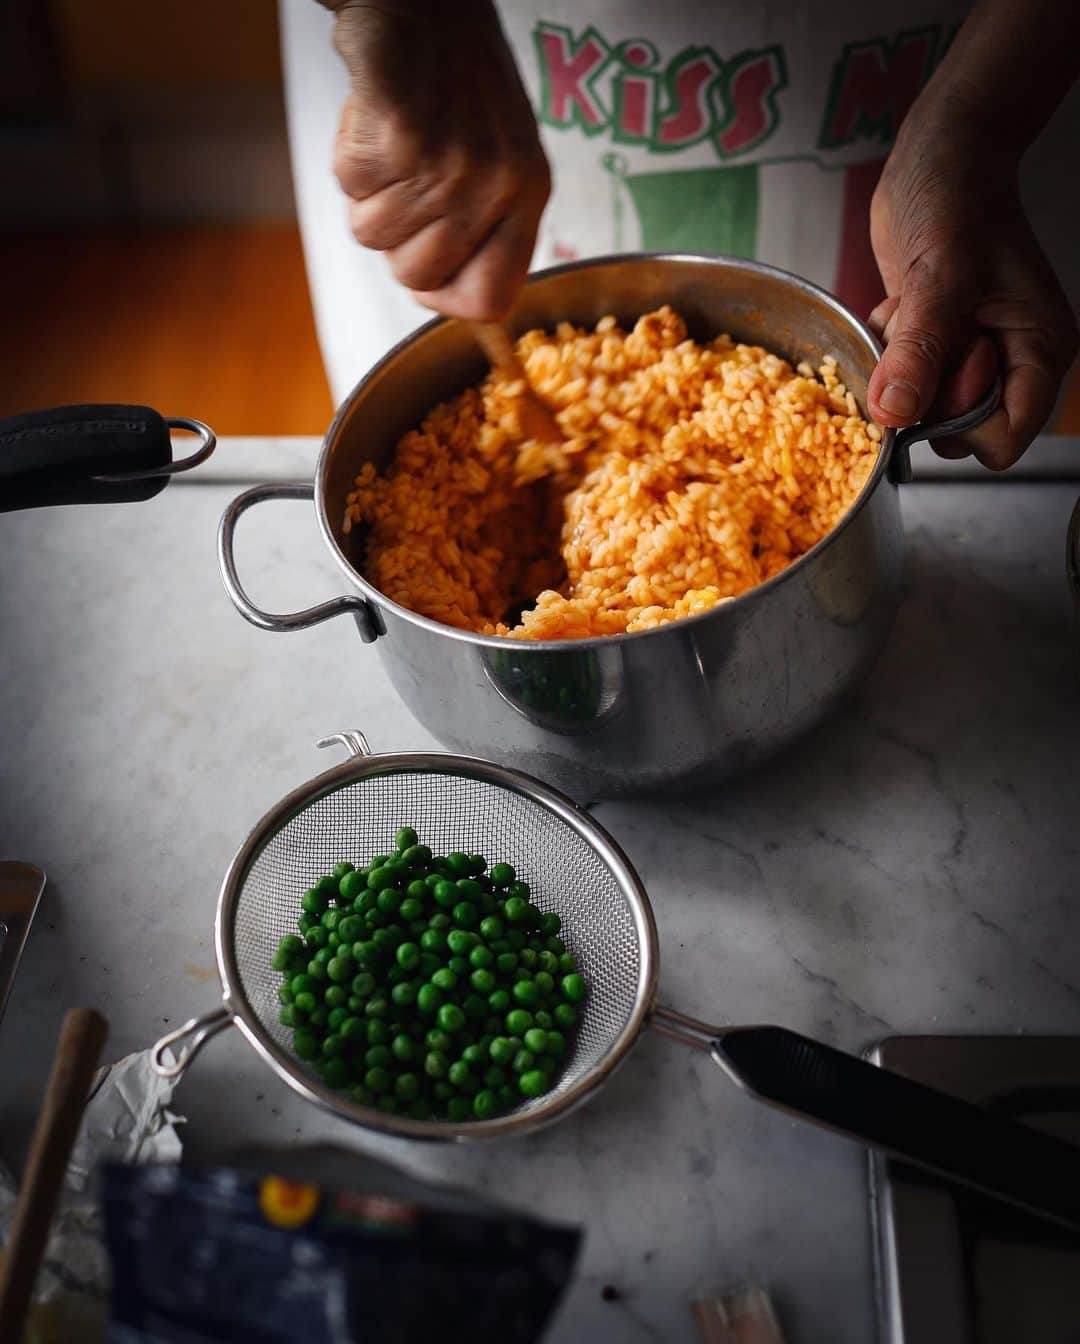 Saghar Setarehさんのインスタグラム写真 - (Saghar SetarehInstagram)「Yesterday I asked my dear friend Fiammetta to teach me how to make the famous Neapolitan Sartù, the spectacular rice “pudding” of sorts, stuffed with ragù, peas, tiny meatballs, pieces of sausage, mozzarella and parmesan cheese. This is how she has made her Sartù, and she even once won an award for it, years ago at a competition held at a tennis club in Naples. ⠀⠀⠀⠀⠀⠀⠀⠀⠀ For my lesson, she had also prepared some of her Neapolitan cookbooks for us to compare different recipes: in the traditional version, the stuffing includes also all sorts of other things such as porcini mushrooms, hard boiled eggs and chicken liver. Apart from a vast and varied cookbook collection, Fiammetta also has A TREASURE of hand written recipes and menus from her grandmother and great aunt, with Christmas menus dating back to 1930s, and special menùs with twists and revisions for the years of war, when many ingredients were scarce.  ⠀⠀⠀⠀⠀⠀⠀⠀⠀ What interests me most about Sartù (apart being the only way Neapolitans would enjoy rice, preferring by far the “maccheroni”, as all the cookbooks said), is how it could ALMOST pass as something very similar to an Iranian Tah-chin; a rice cake glued together with yogurt, butter, eggs and saffron (the Sartù uses parmesan, eggs, butter and a little bit of the sauce of the ragù), stuffed with saffron chicken, OR fried eggplants, or other things, depending on the regions.  ⠀⠀⠀⠀⠀⠀⠀⠀⠀ They both take time, but they're absolutely worth the effort and they're fail-free ways to impress a crowd at a party.  ⠀⠀⠀⠀⠀⠀⠀⠀⠀ Have a lovely Sunday. ⠀⠀⠀⠀⠀⠀⠀⠀⠀ #FlavorsAndEncounters #LabNoonFood #sartùnapoletano」10月4日 21時52分 - labnoon